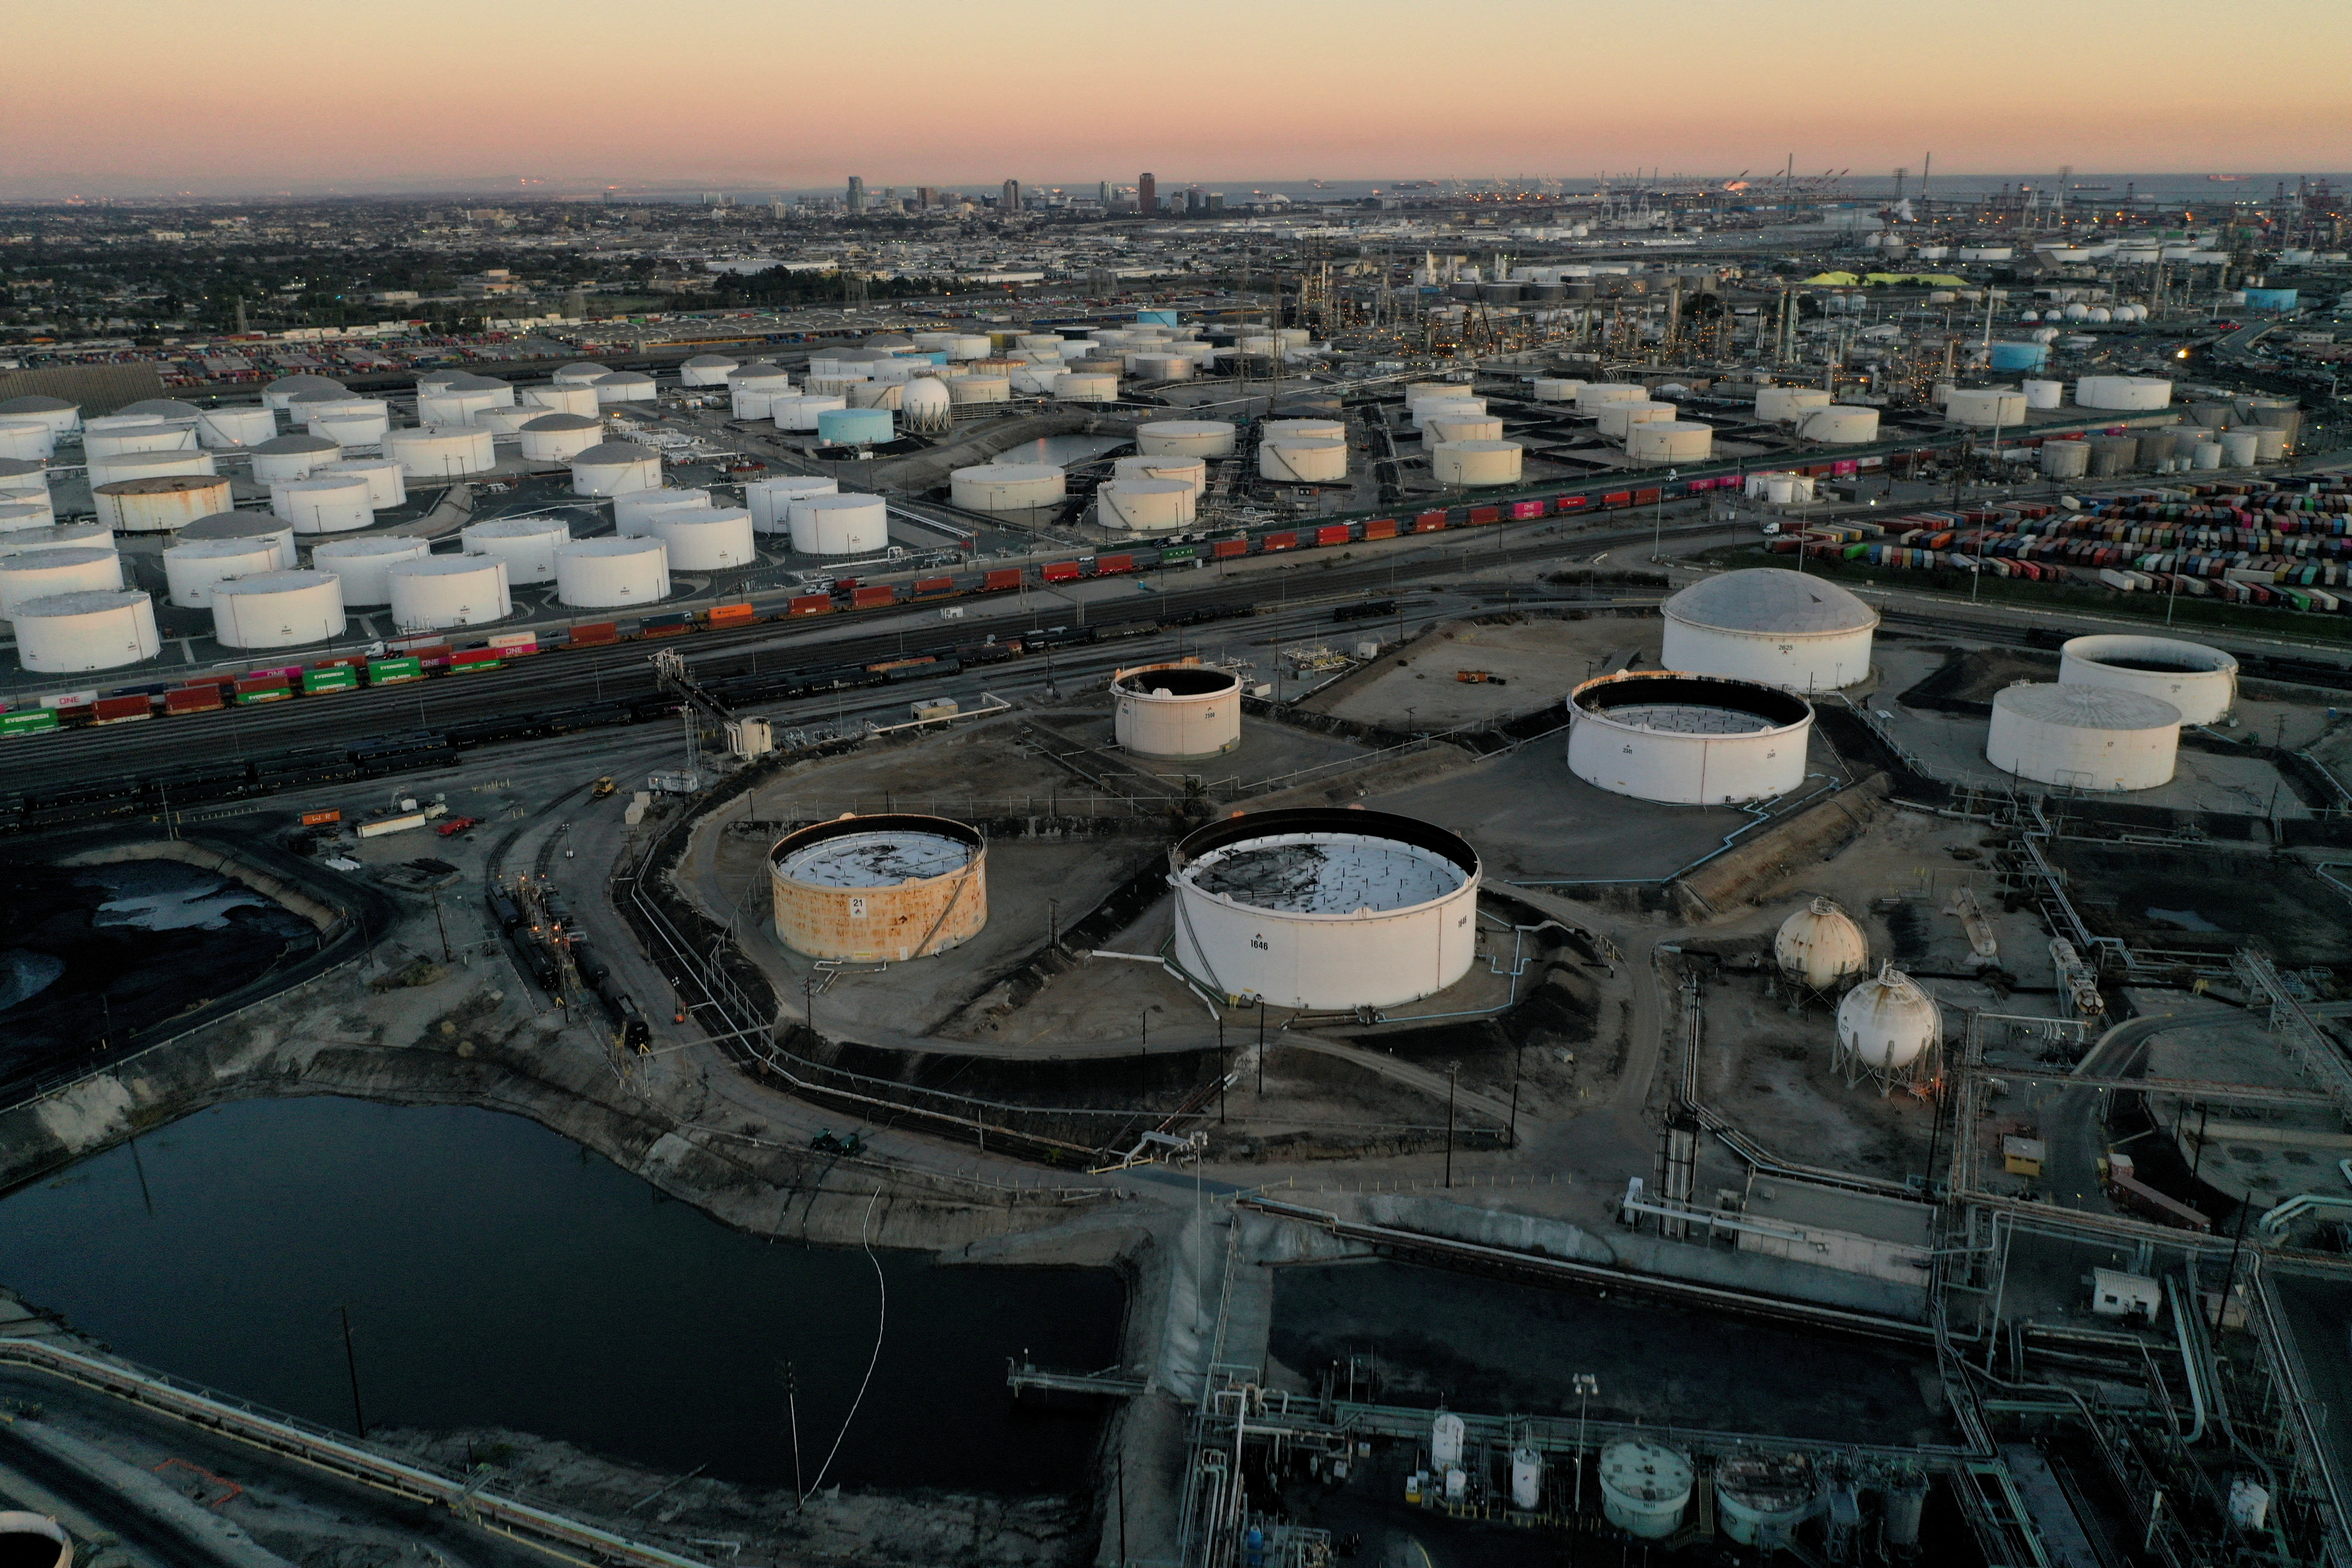 Aerial view of storage tanks at Kinder Morgan Terminal and Phillips 66 Refinery in Carson, California